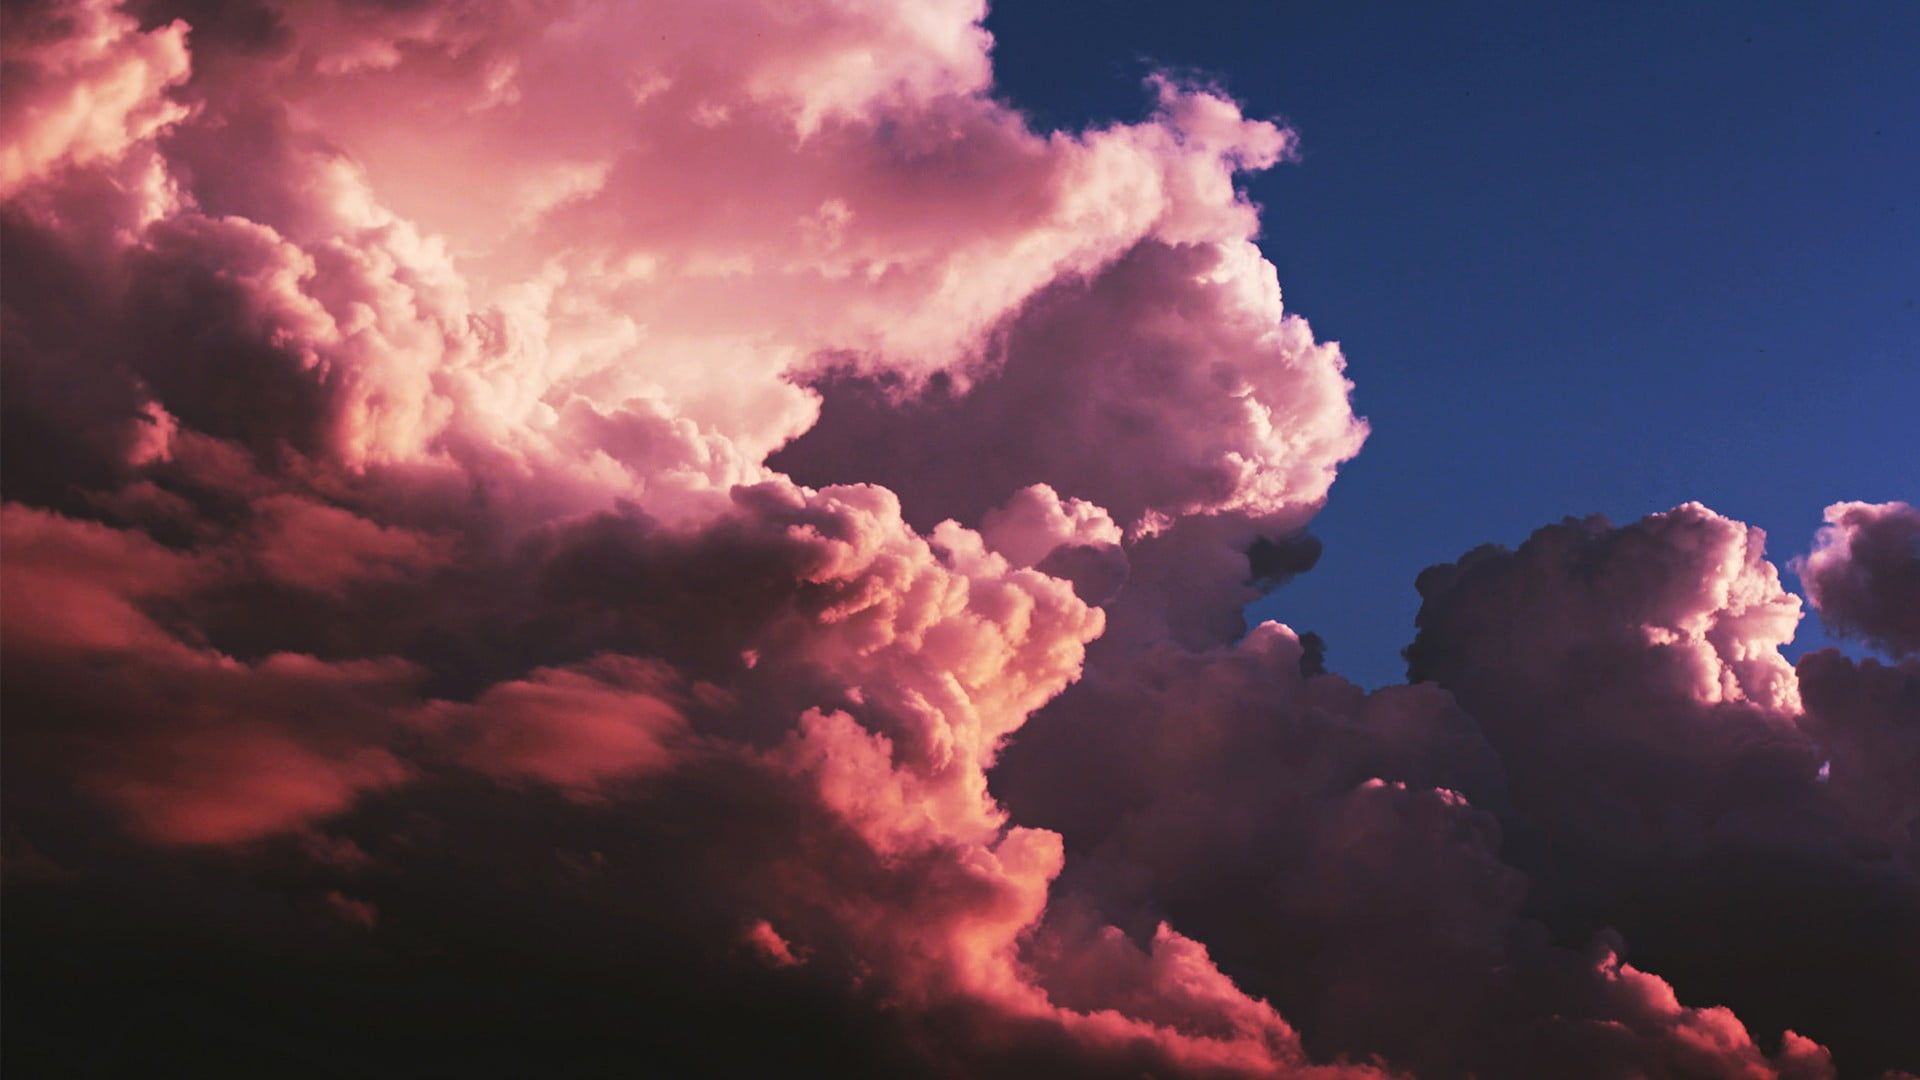 Aesthetic Pink Cloud Wallpaper Free Aesthetic Pink Cloud Background